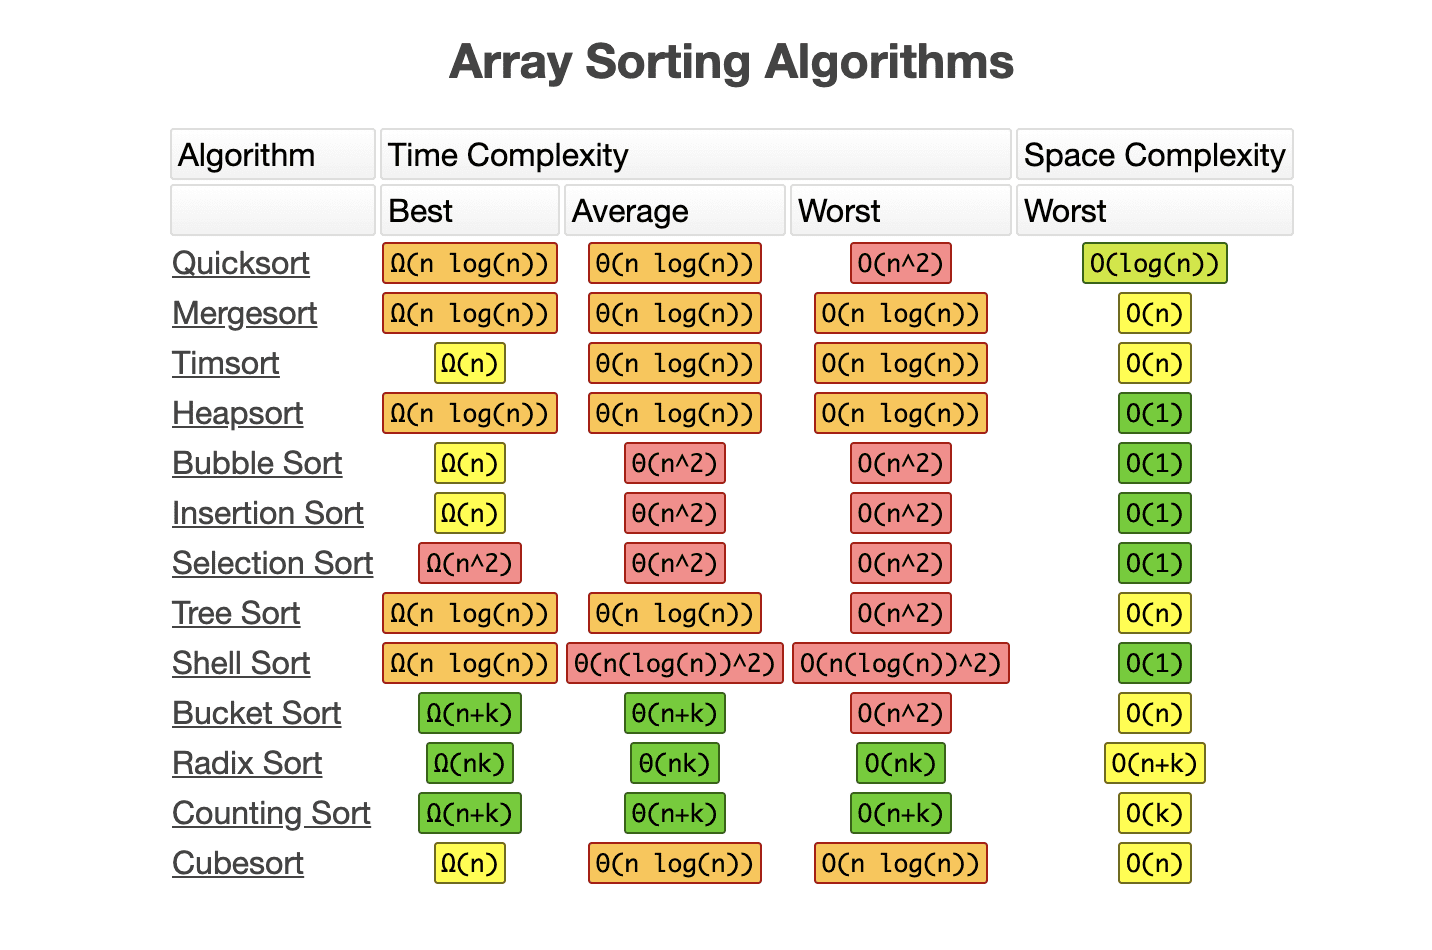 Sorting algorithms. Time complexity. Sort algorithms. Arrays.sort time complexity.